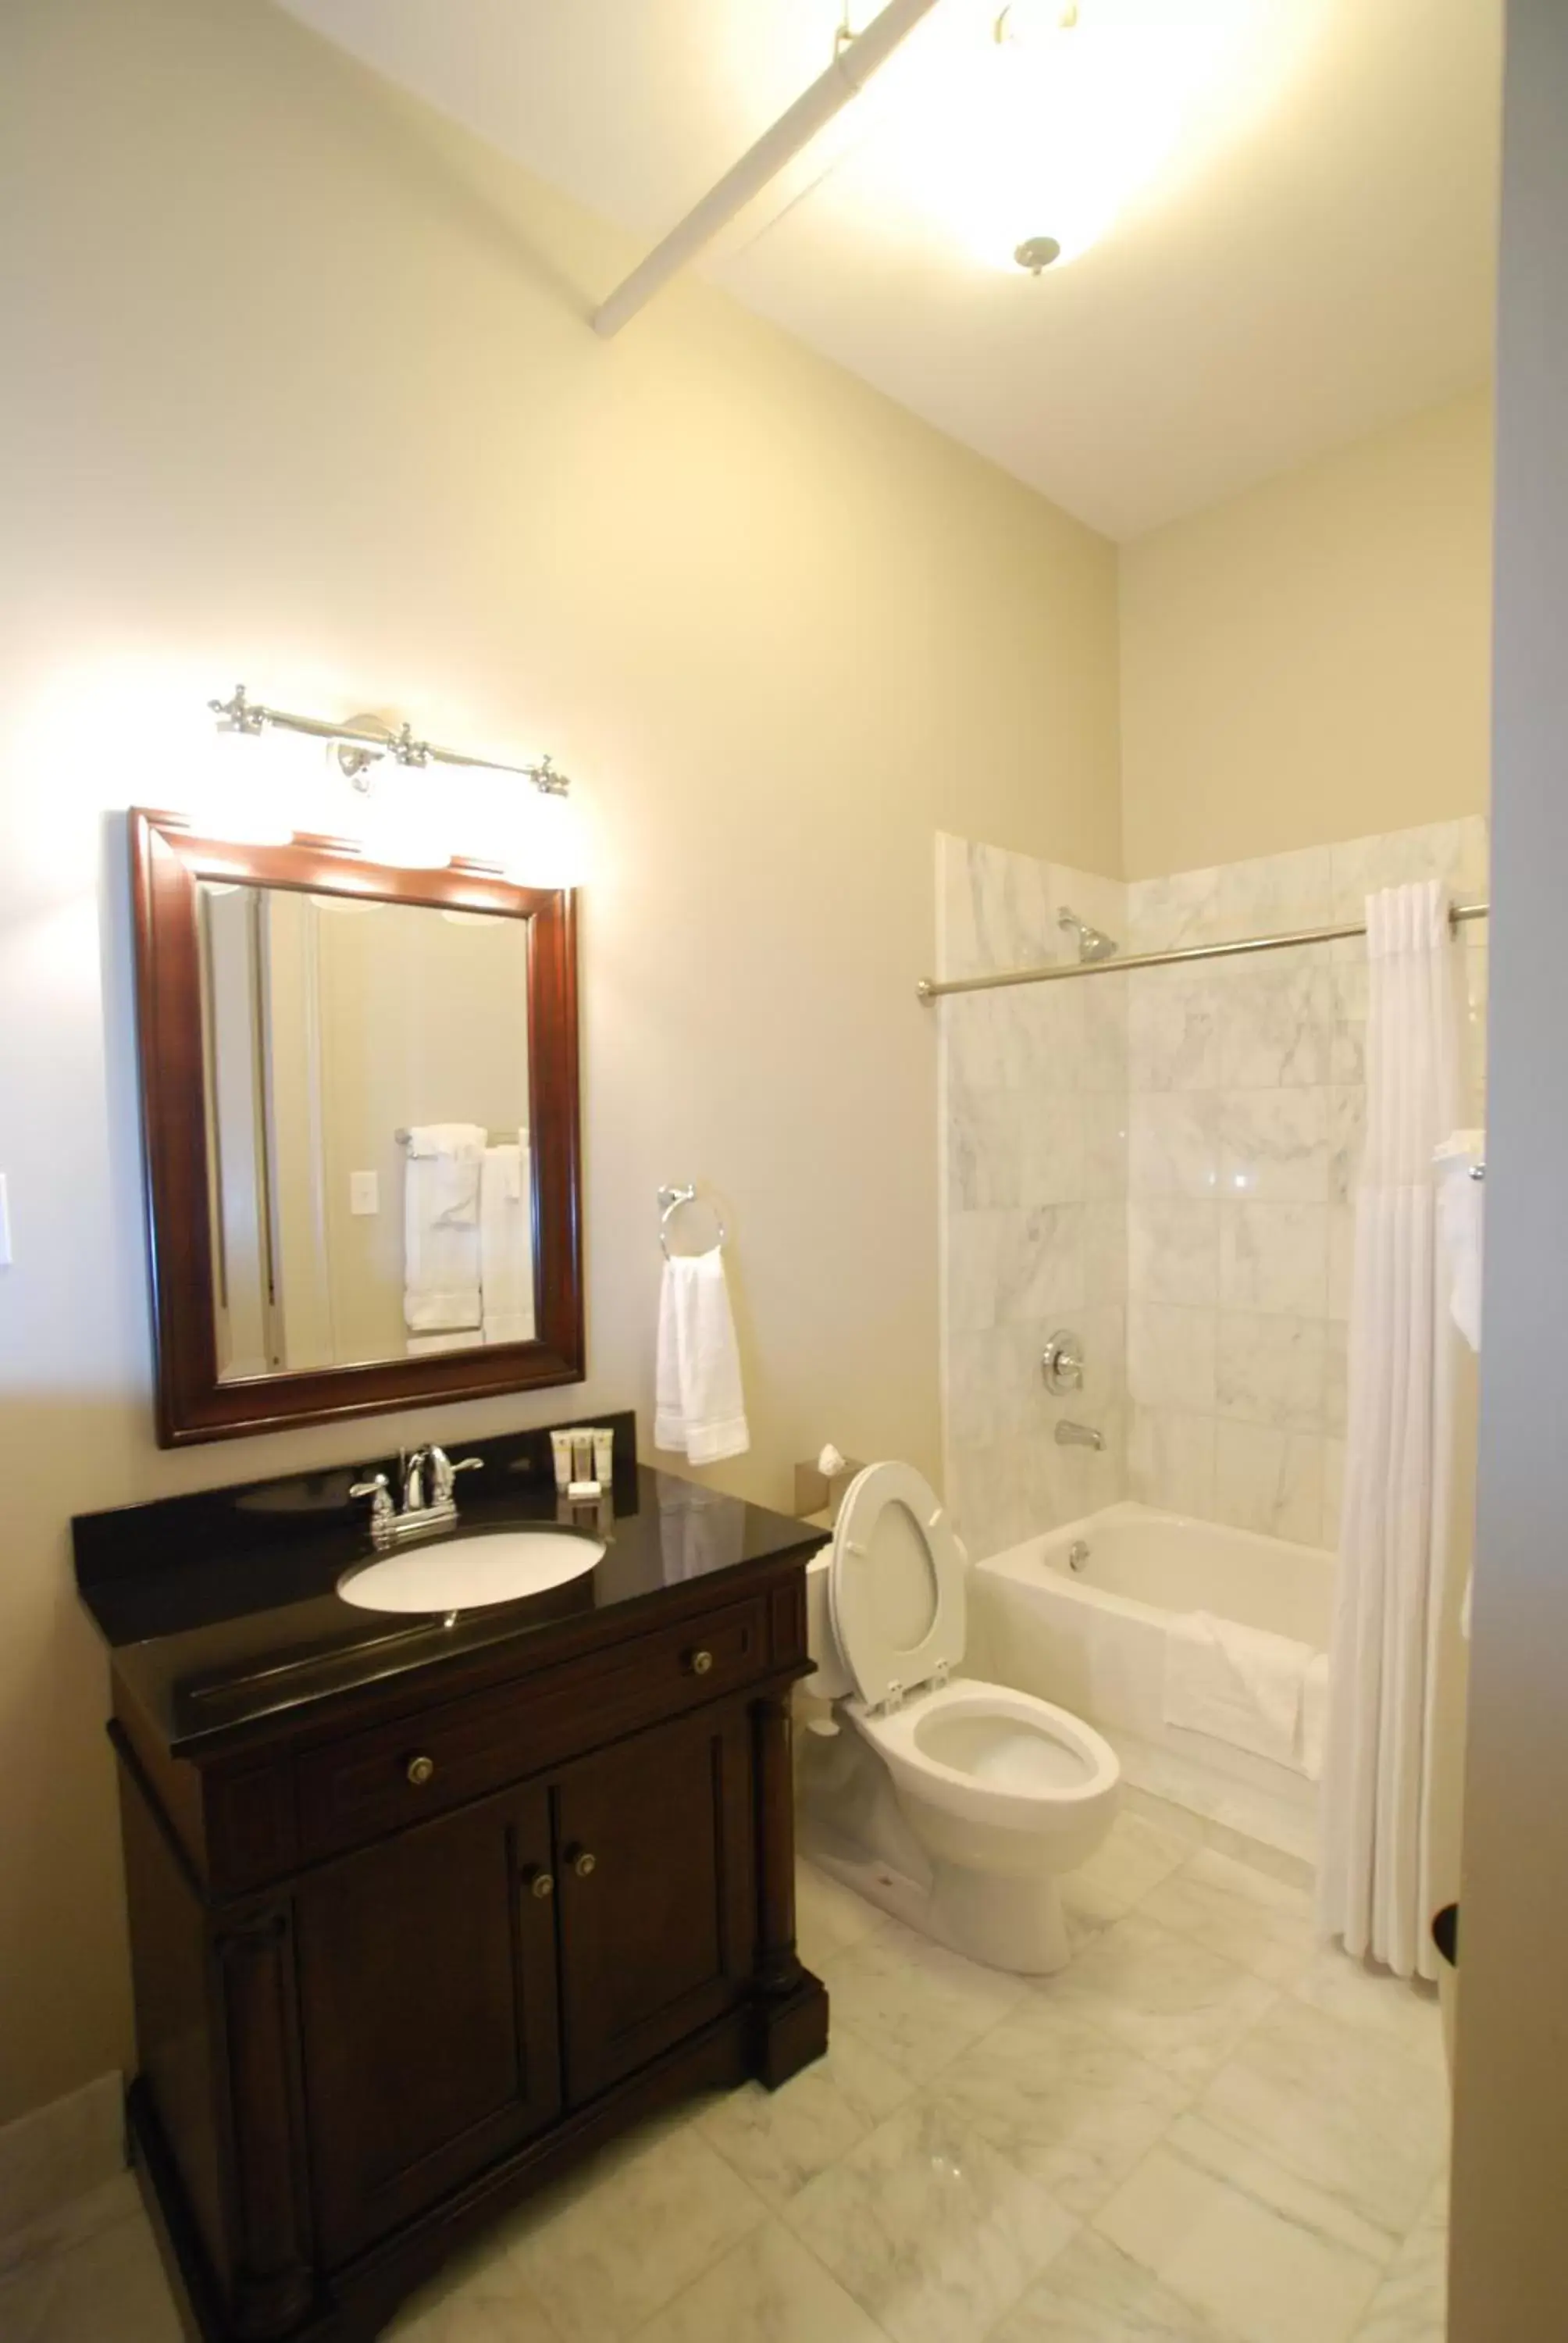 Bathroom in Inn on St. Peter, a French Quarter Guest Houses Property